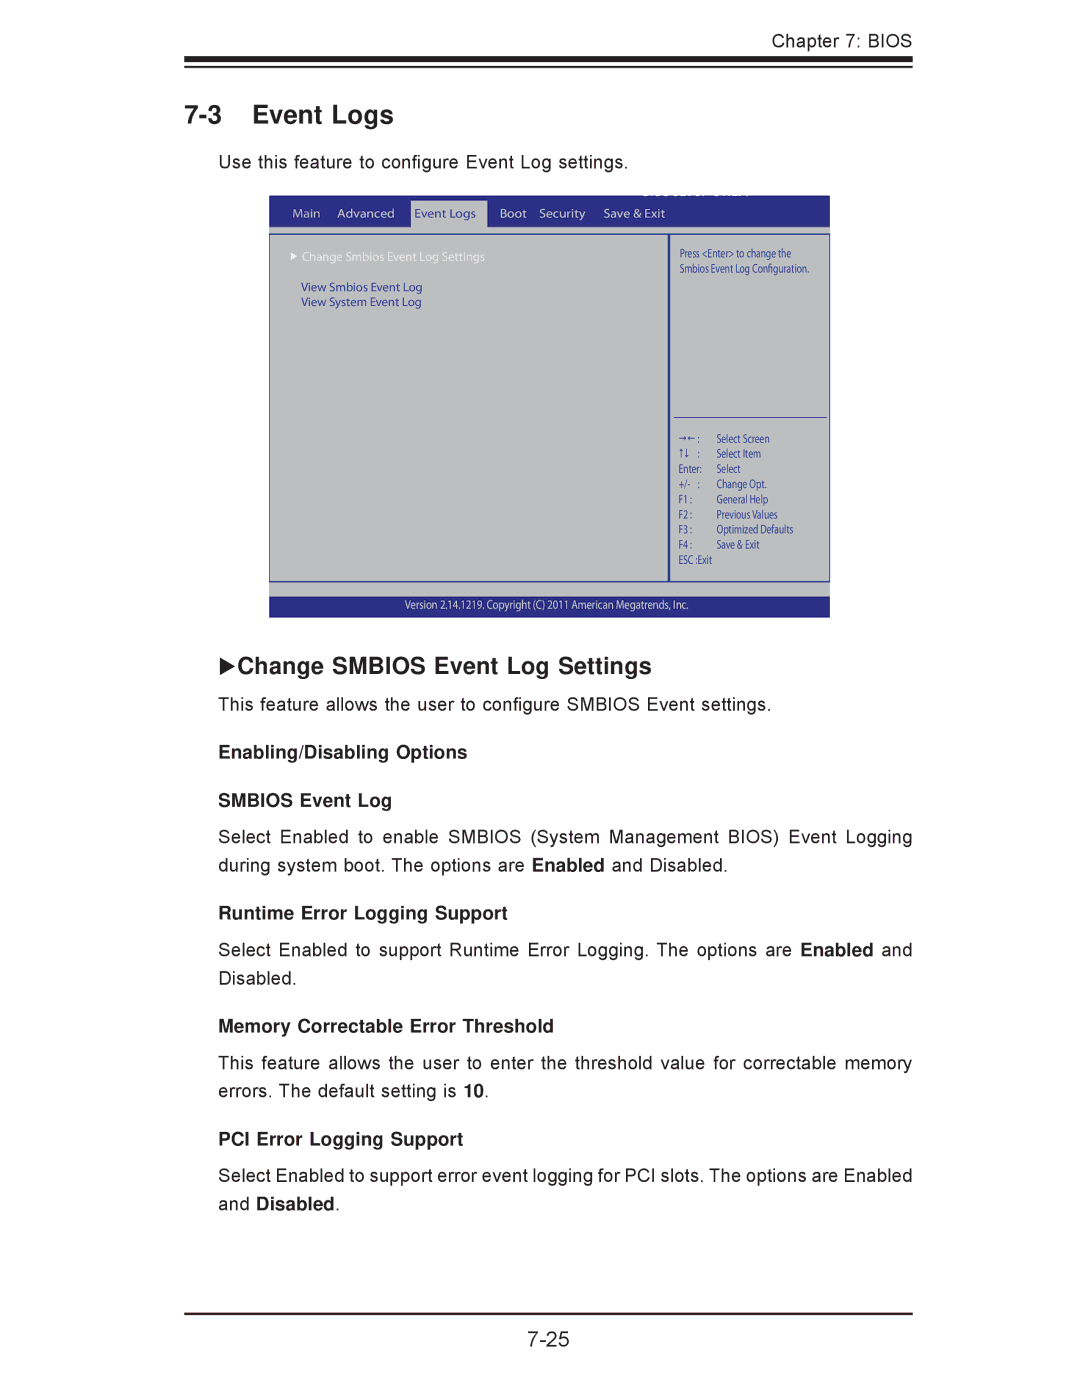 SUPER MICRO Computer 7047A-73, 7047A-T user manual Event Logs, XChange Smbios Event Log Settings 